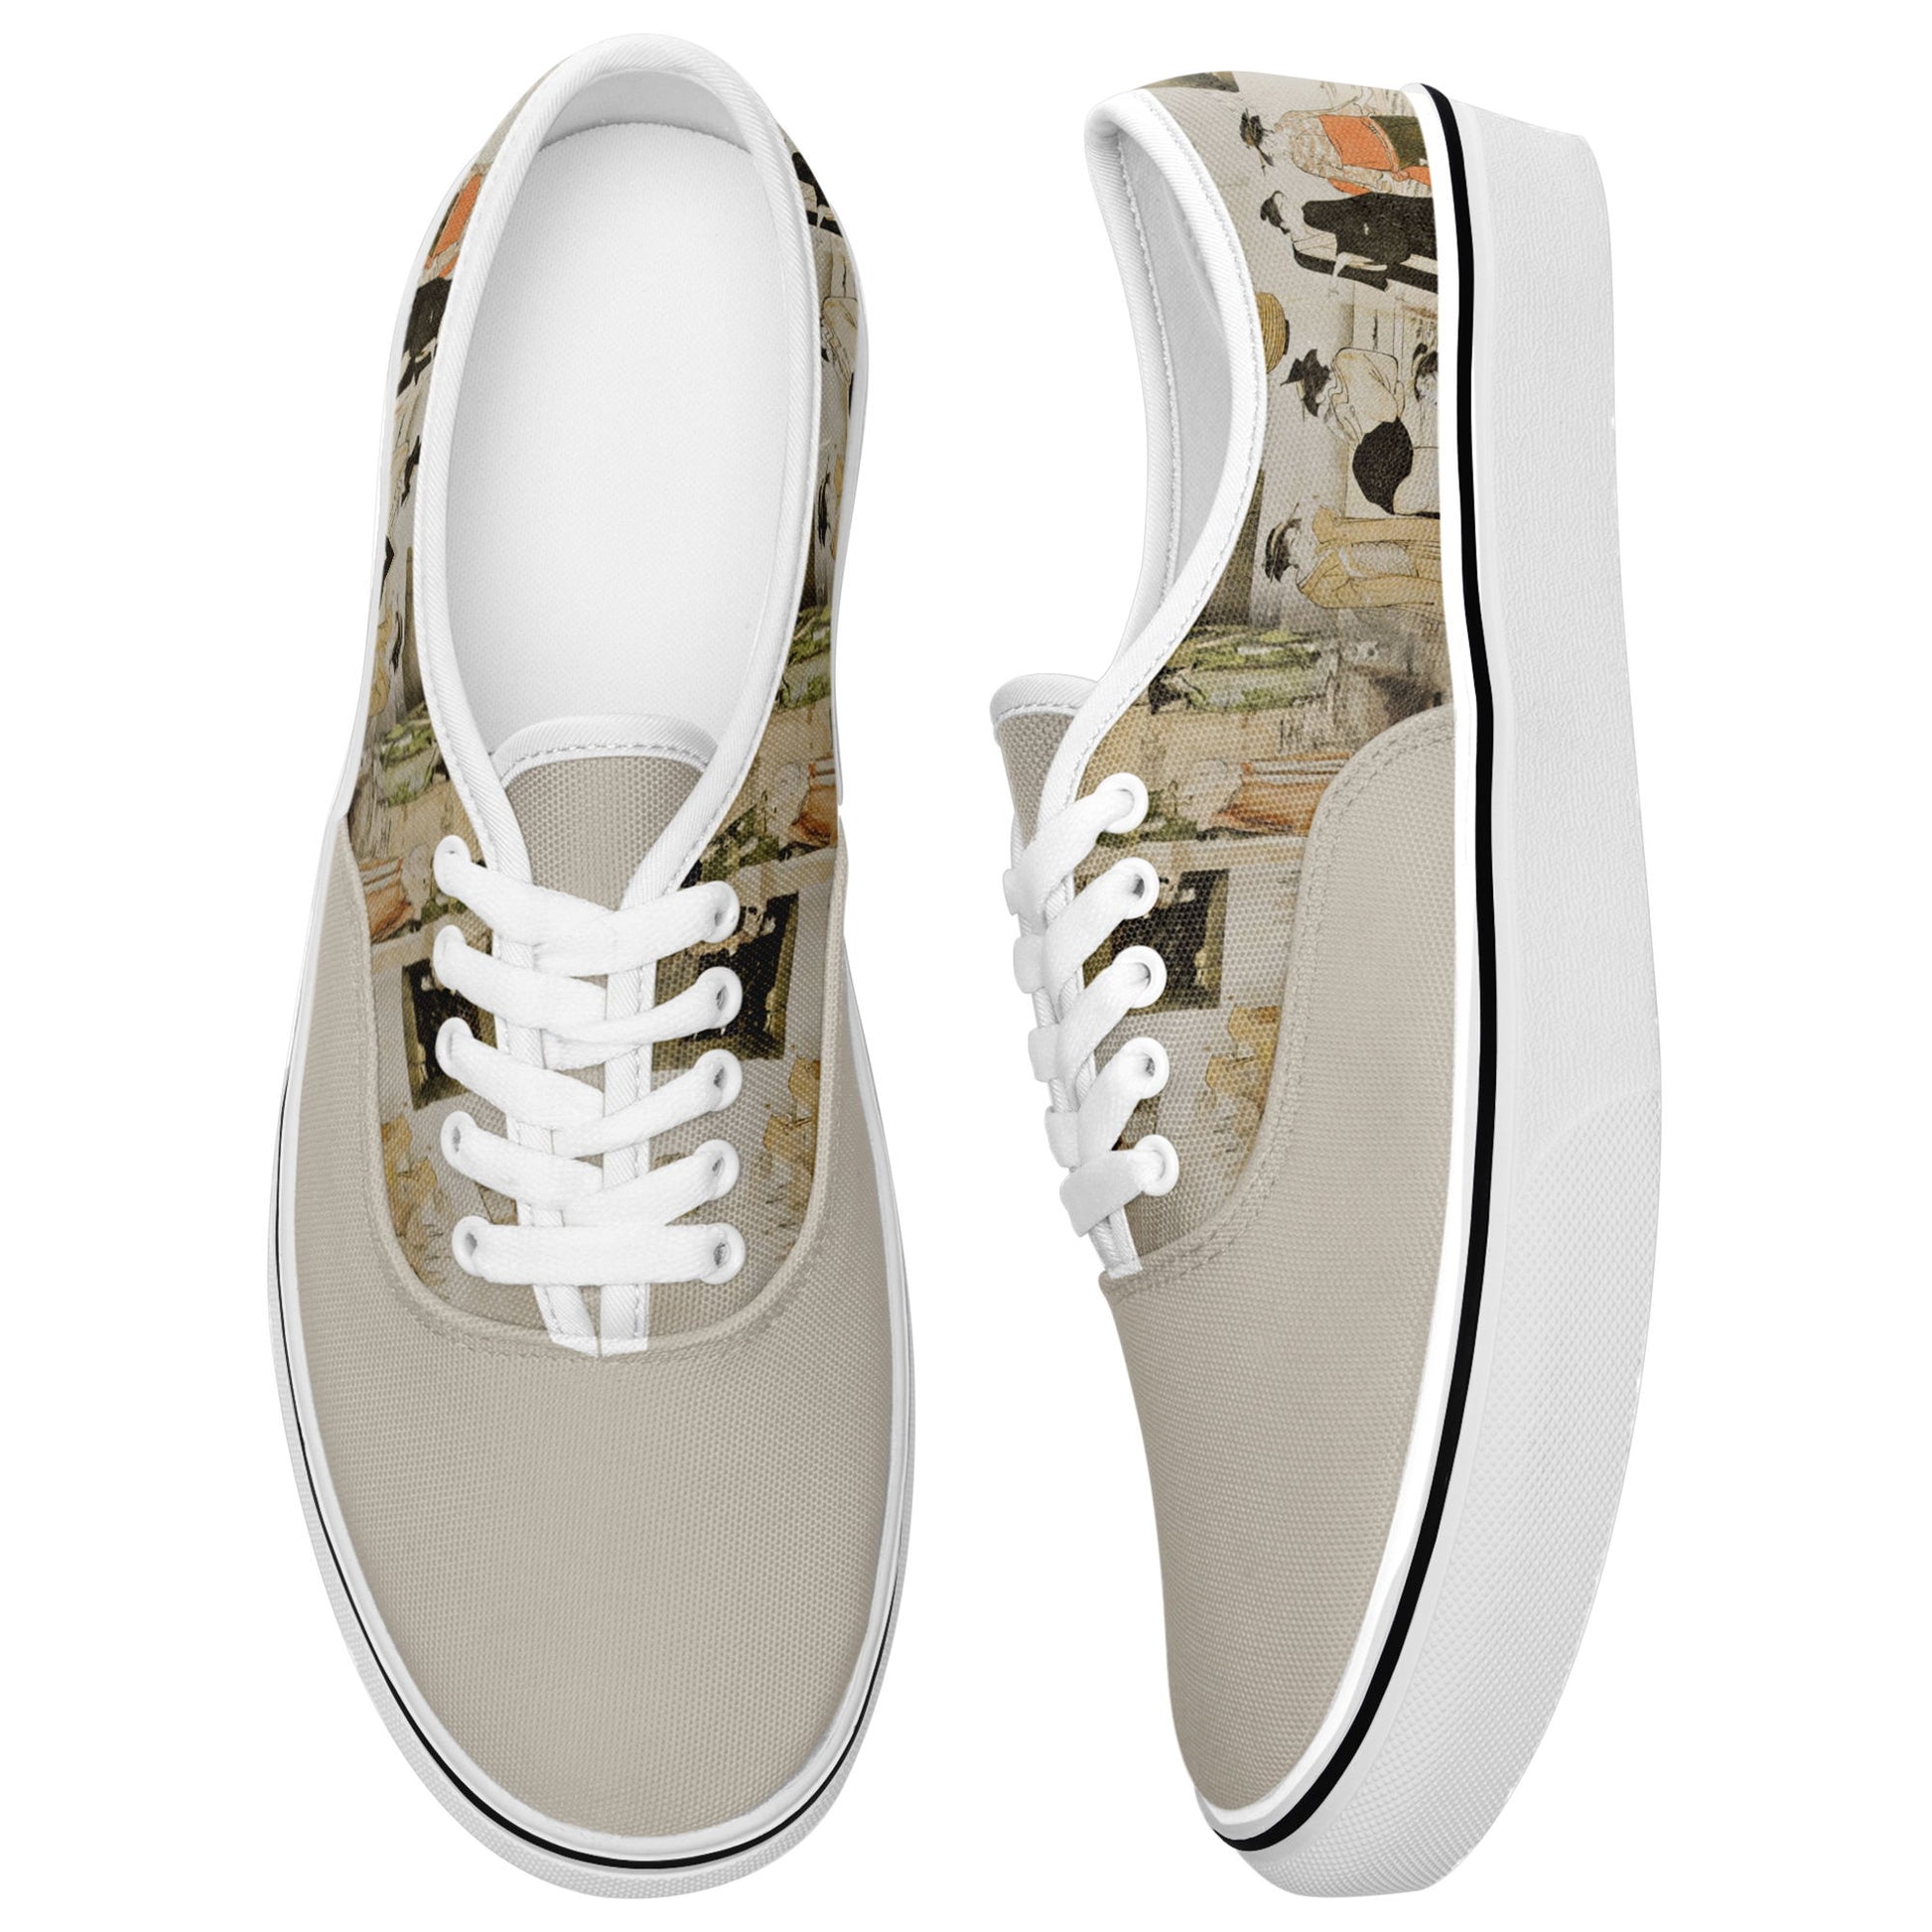 customize printed casual shoes 7213 with retro art ukiyo-e matchmaking by president kiyonaga torii sneakers white soles 4